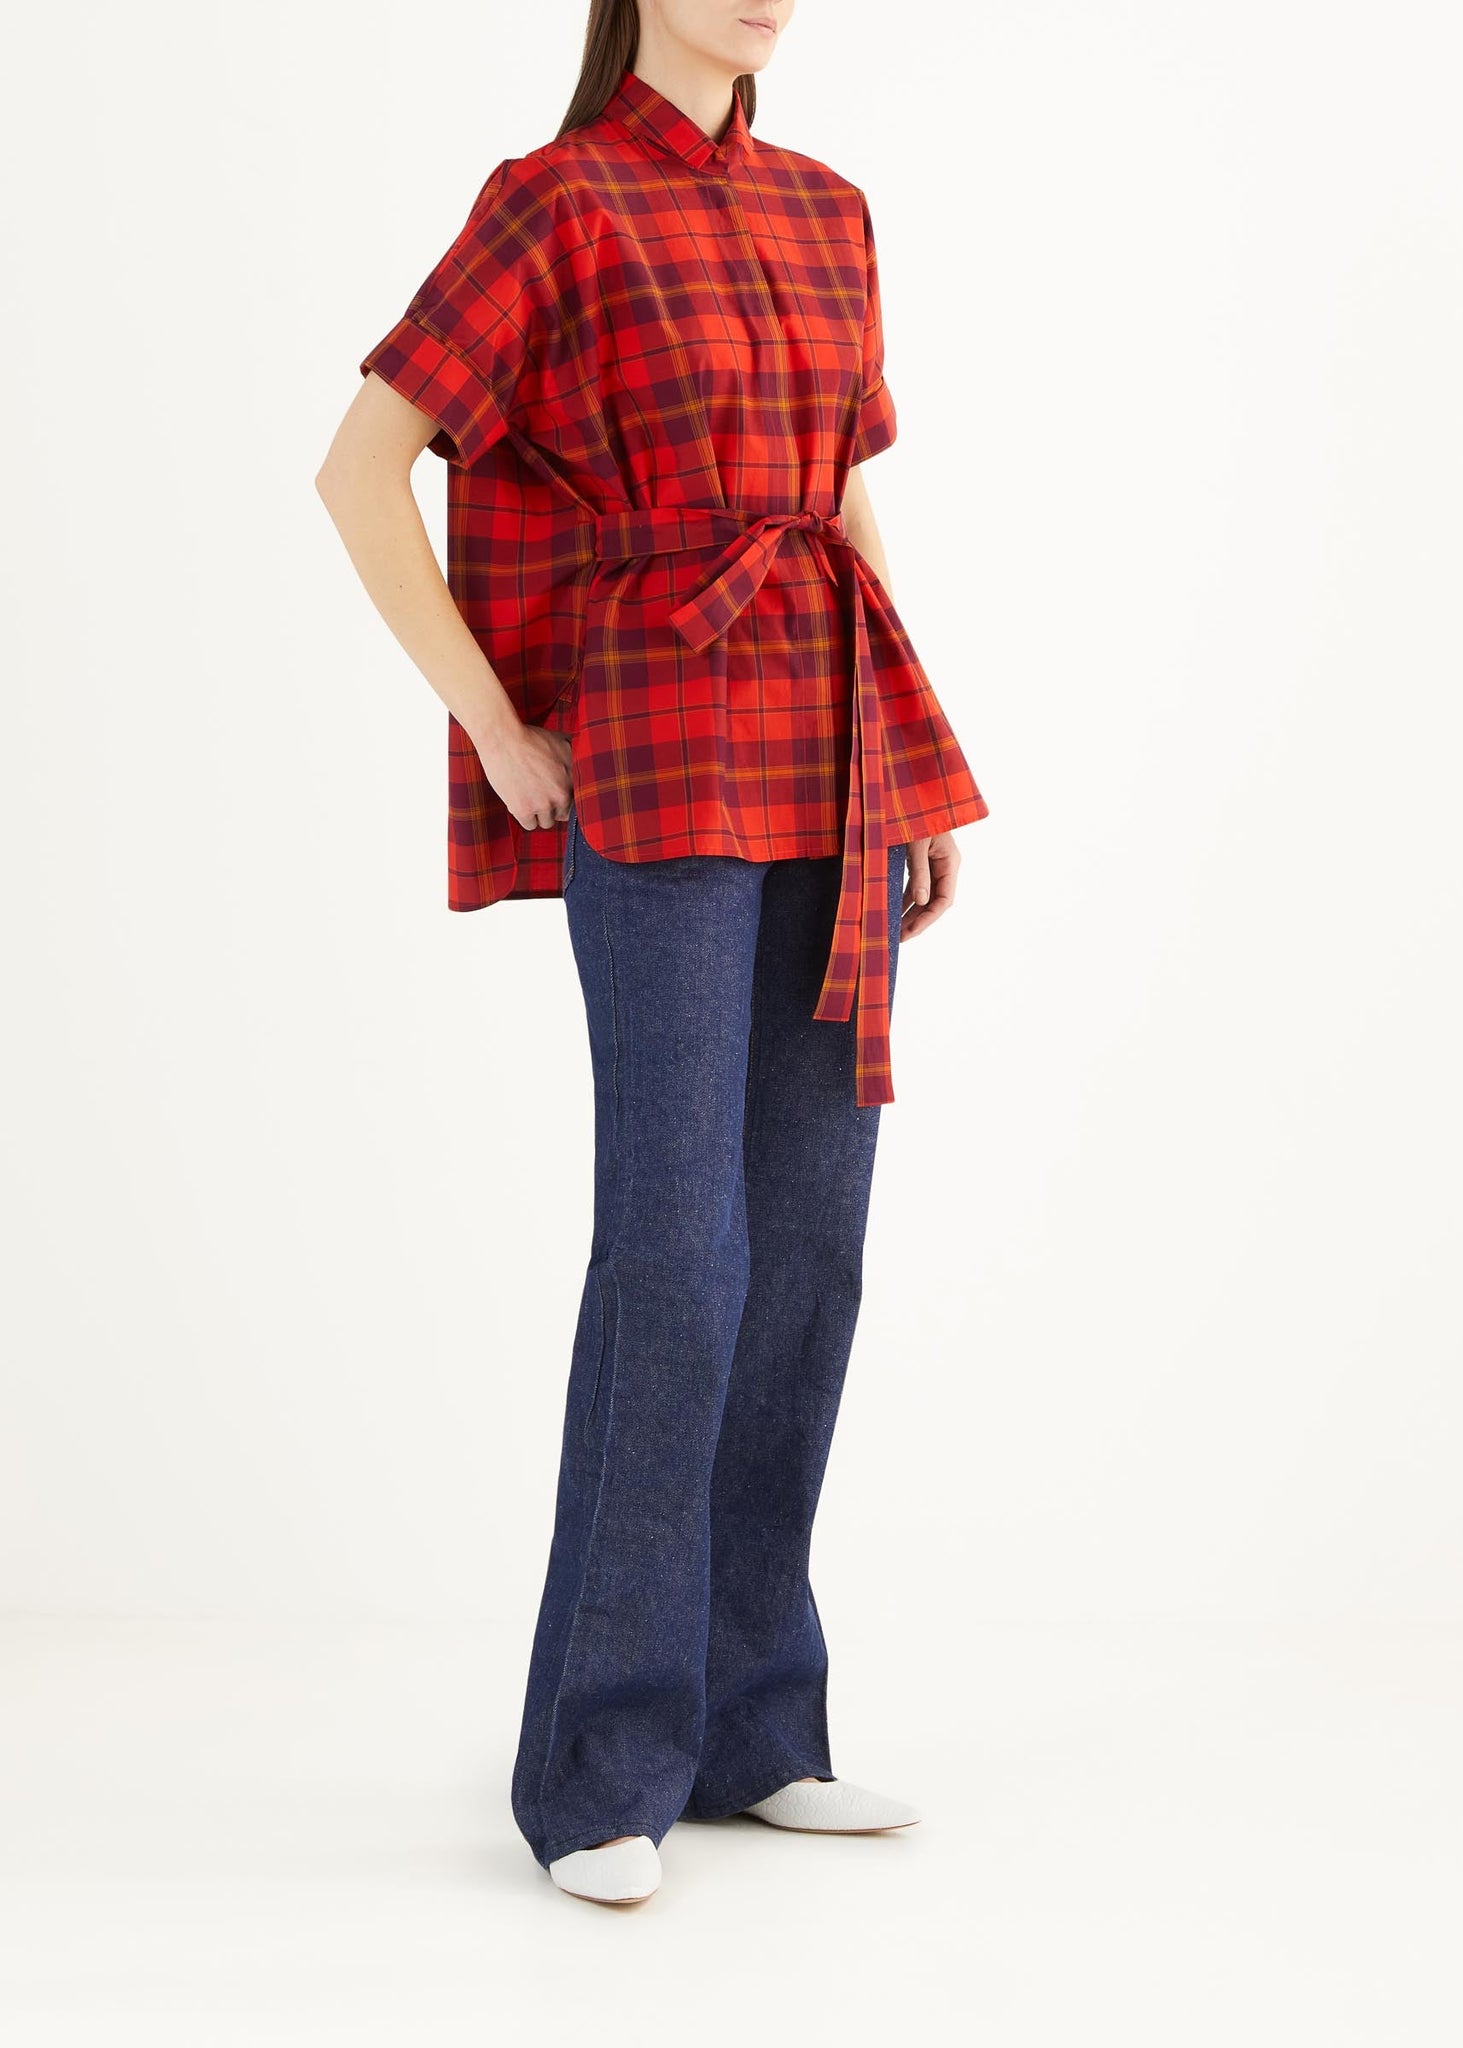 BAILEY SHIRT in RED PLAID